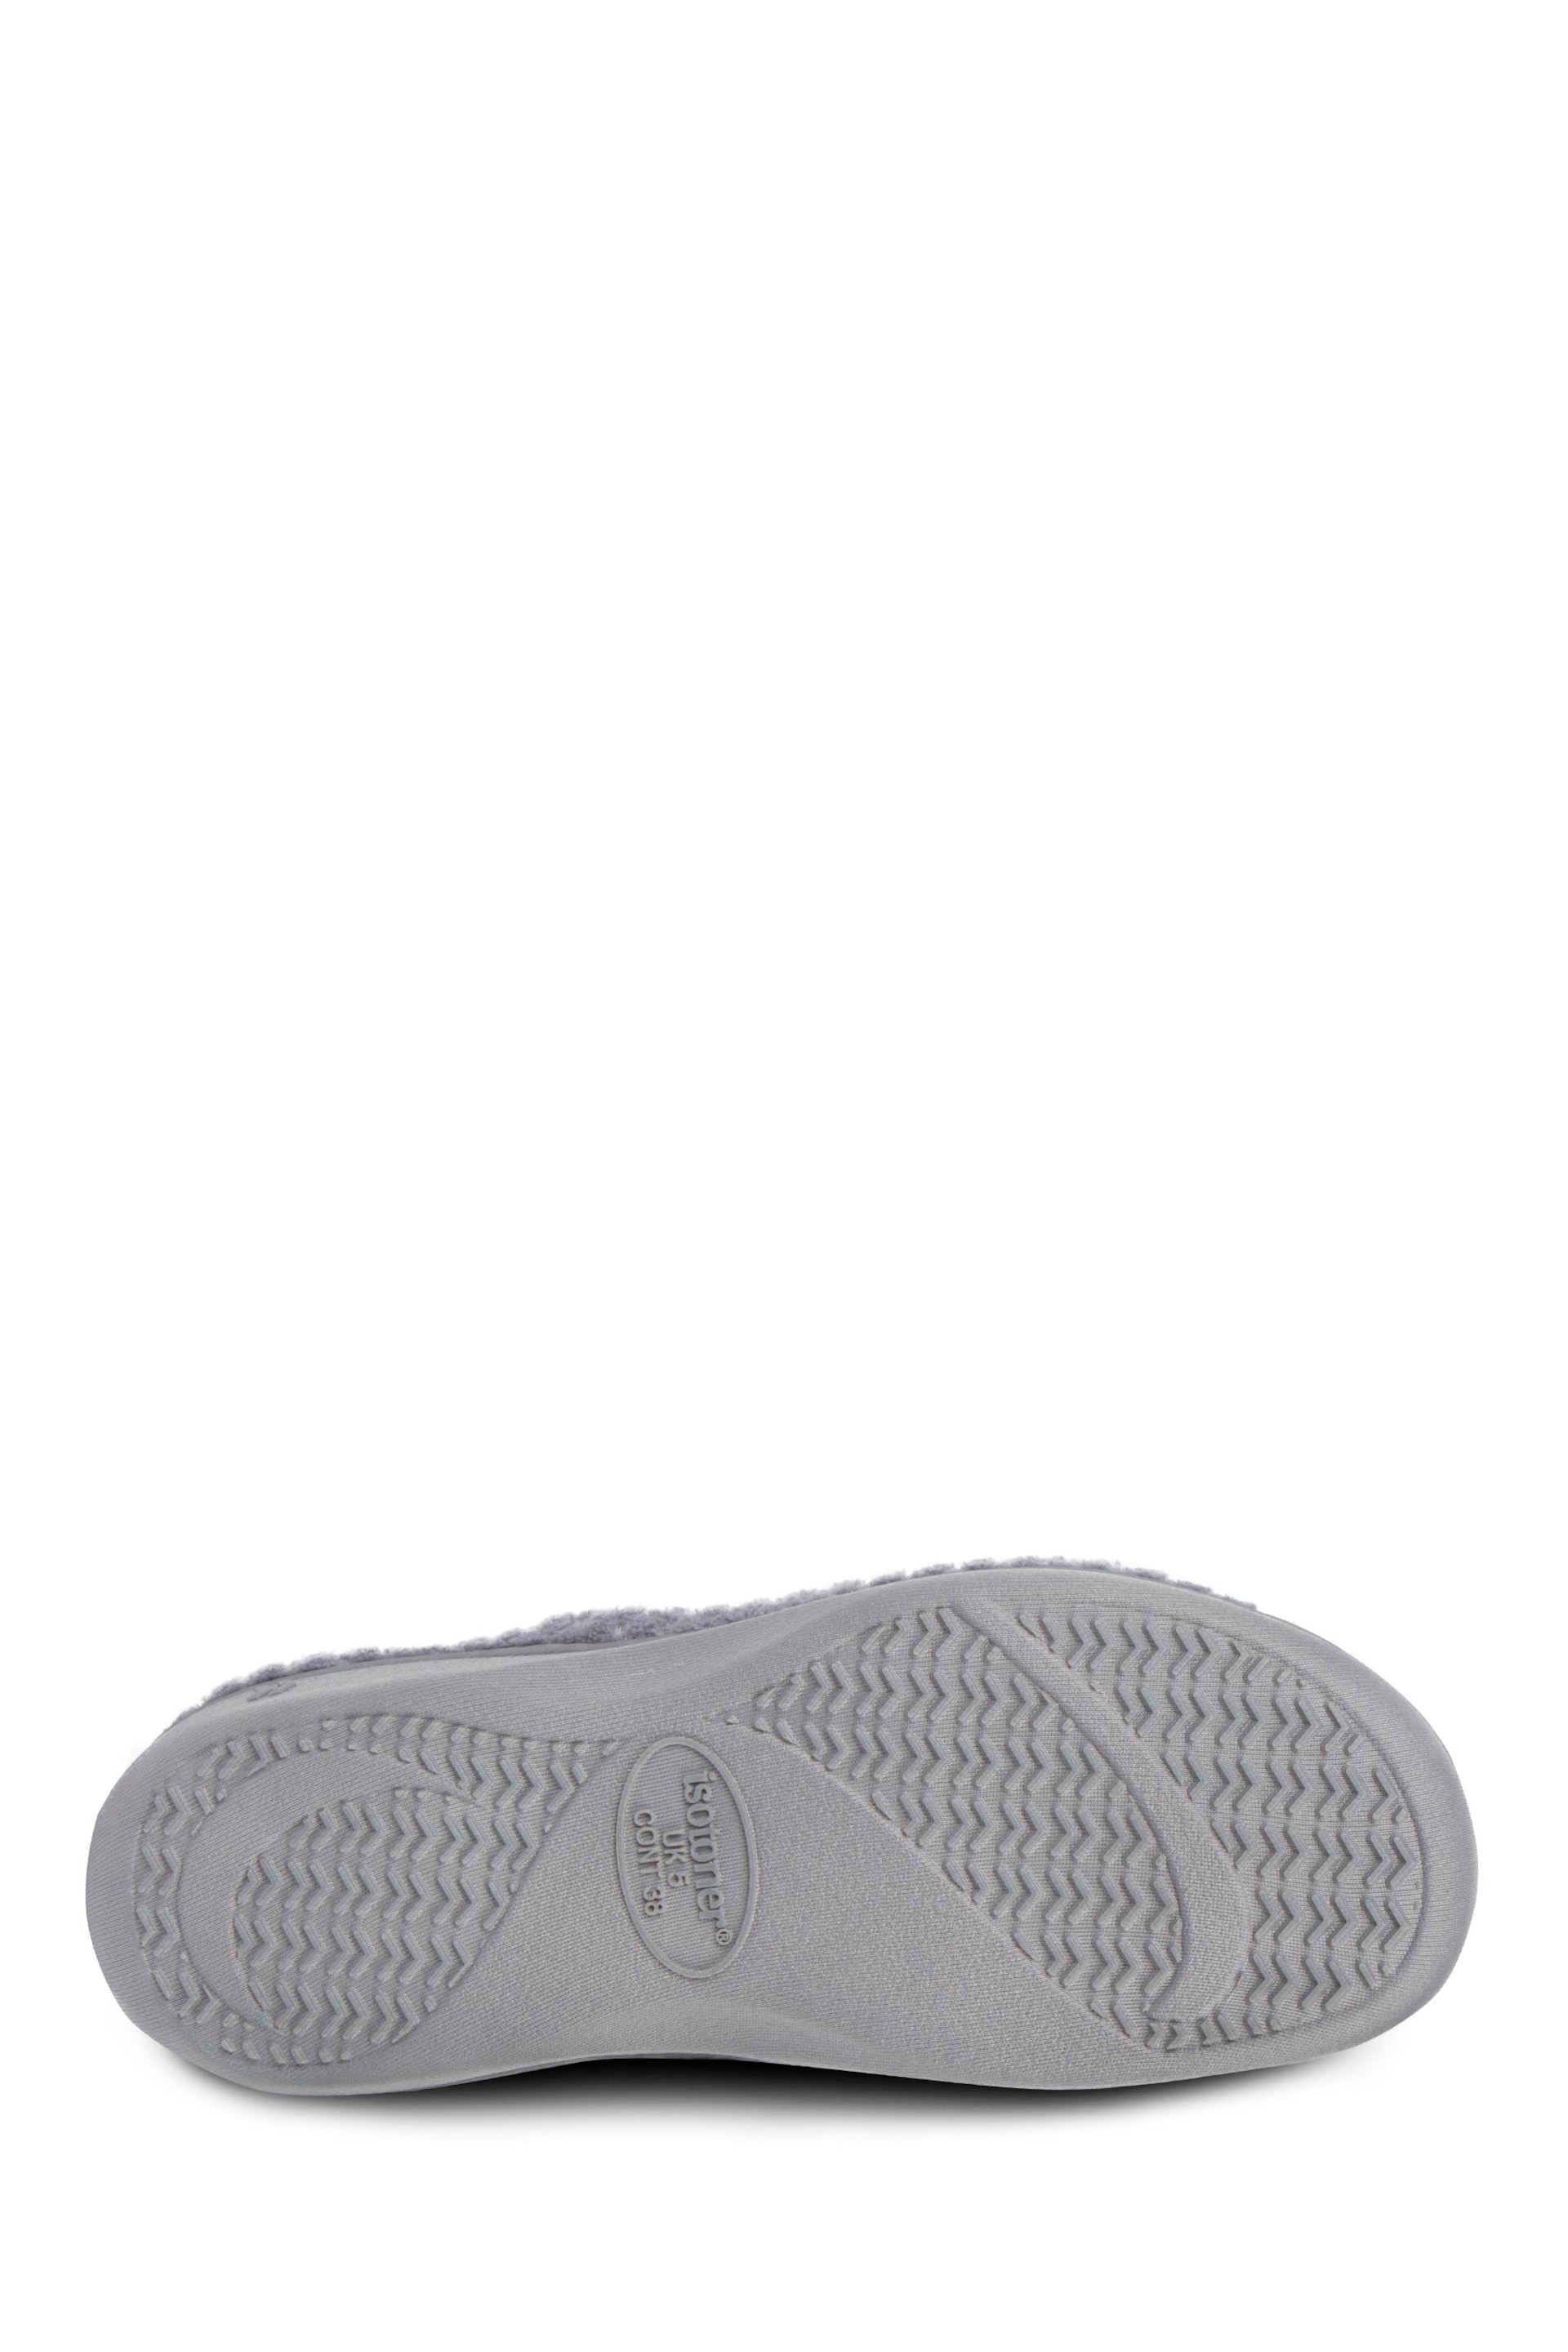 Totes Grey Popcorn Turnover Open Toe Slippers - Image 5 of 5